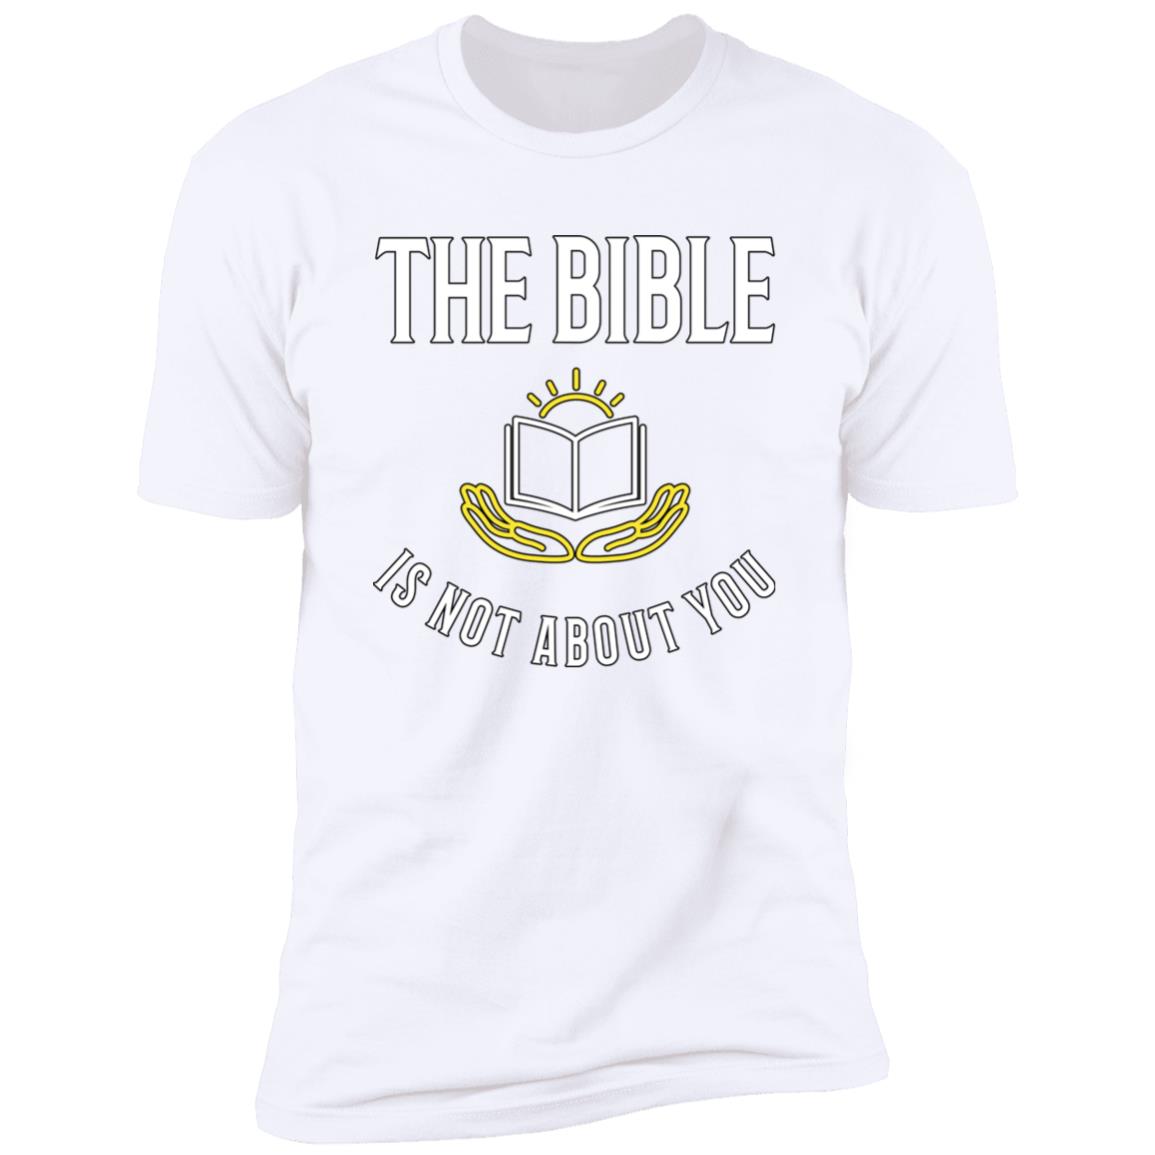 The Bible is not About You! (Unisex Tee)